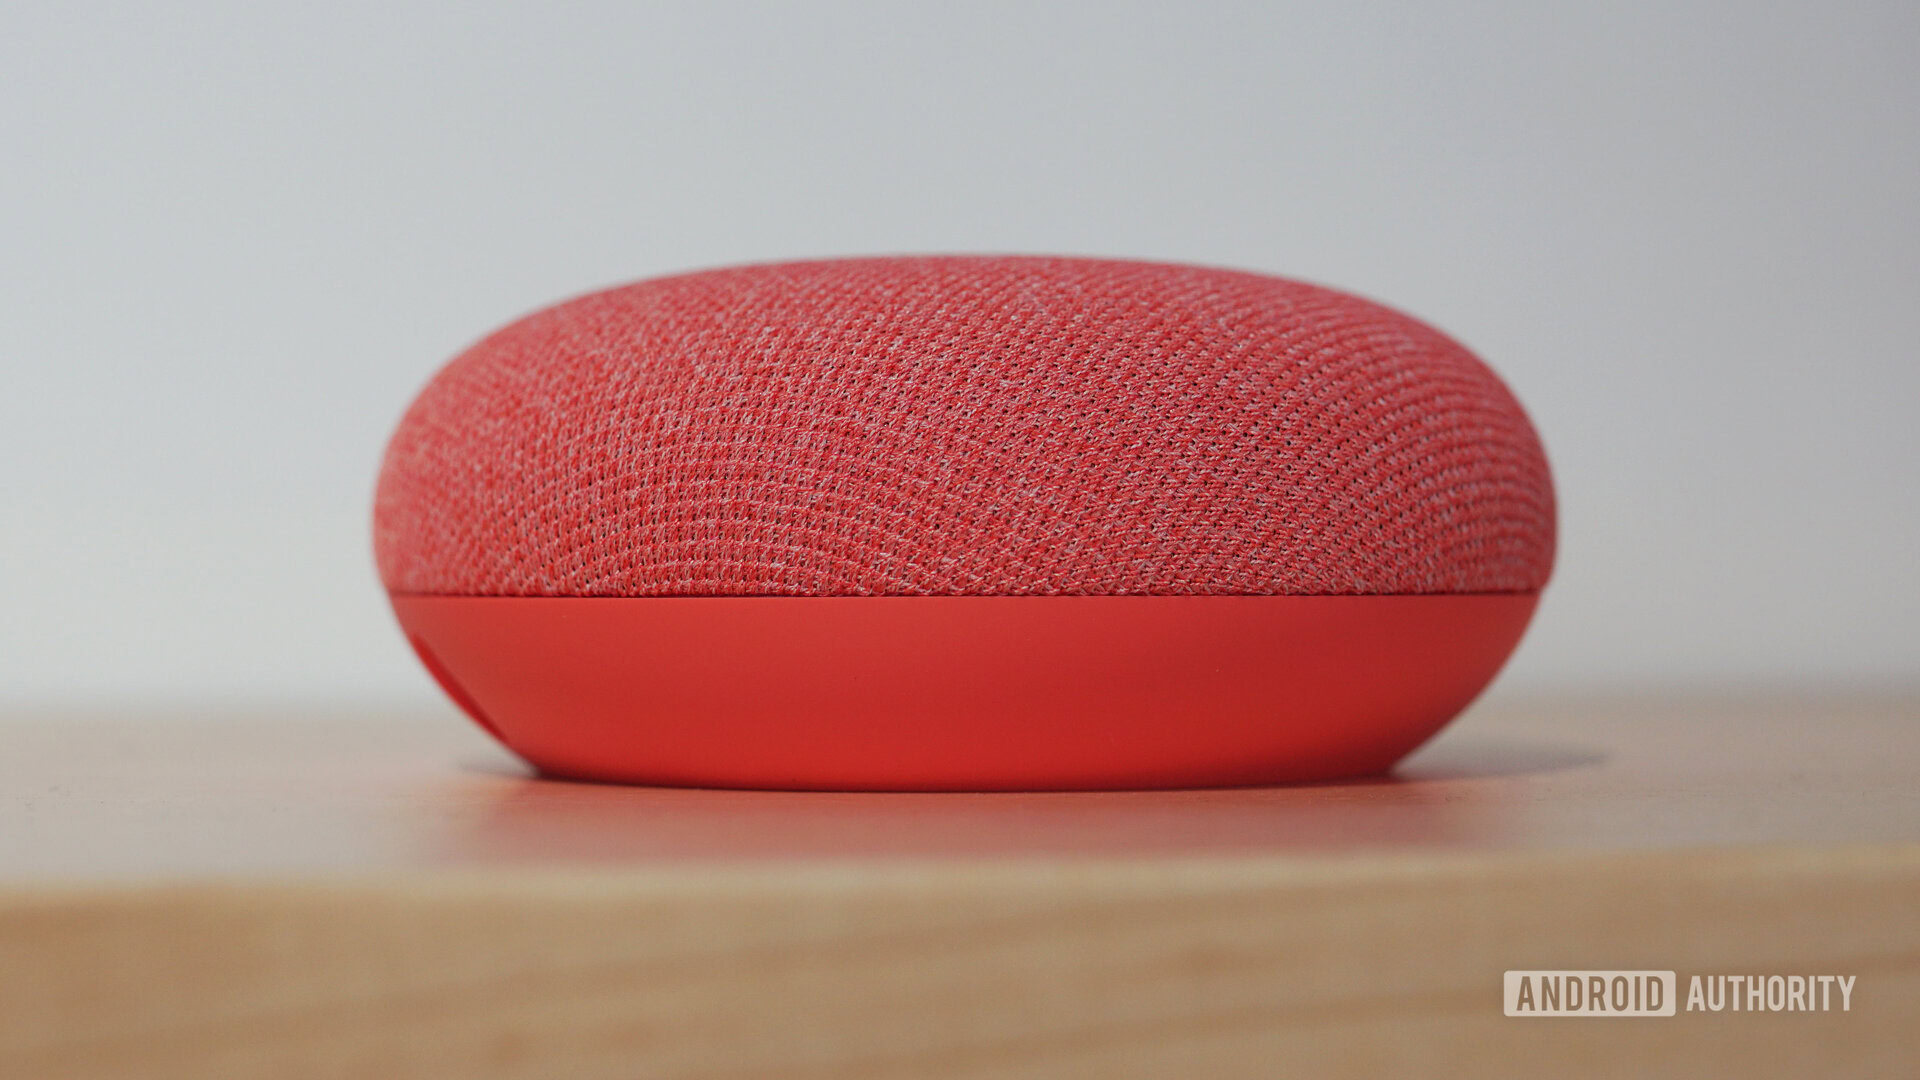 https://www.androidauthority.com/wp-content/uploads/2019/10/Google-Nest-Mini-closeup-in-Coral-color.jpg